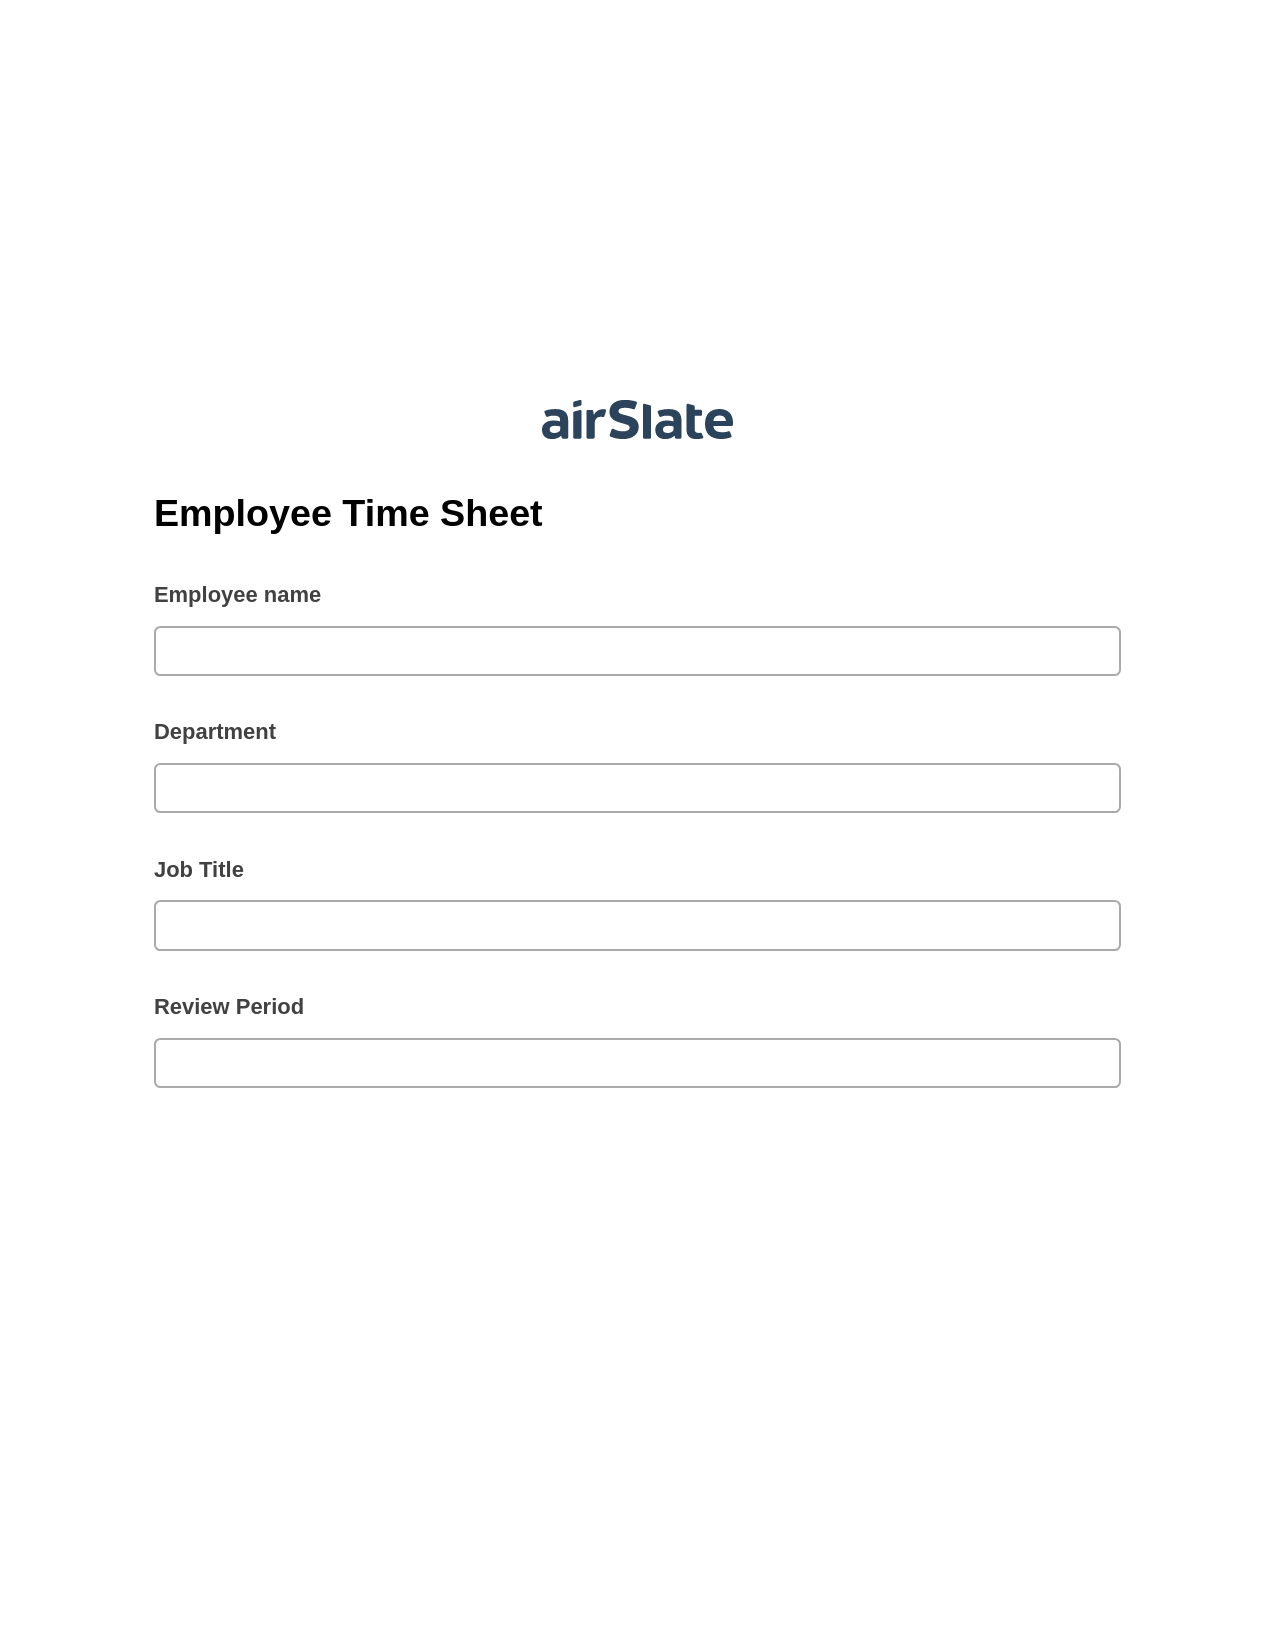 Employee Time Sheet Pre-fill from CSV File Bot, Update Audit Trail Bot, Export to Google Sheet Bot